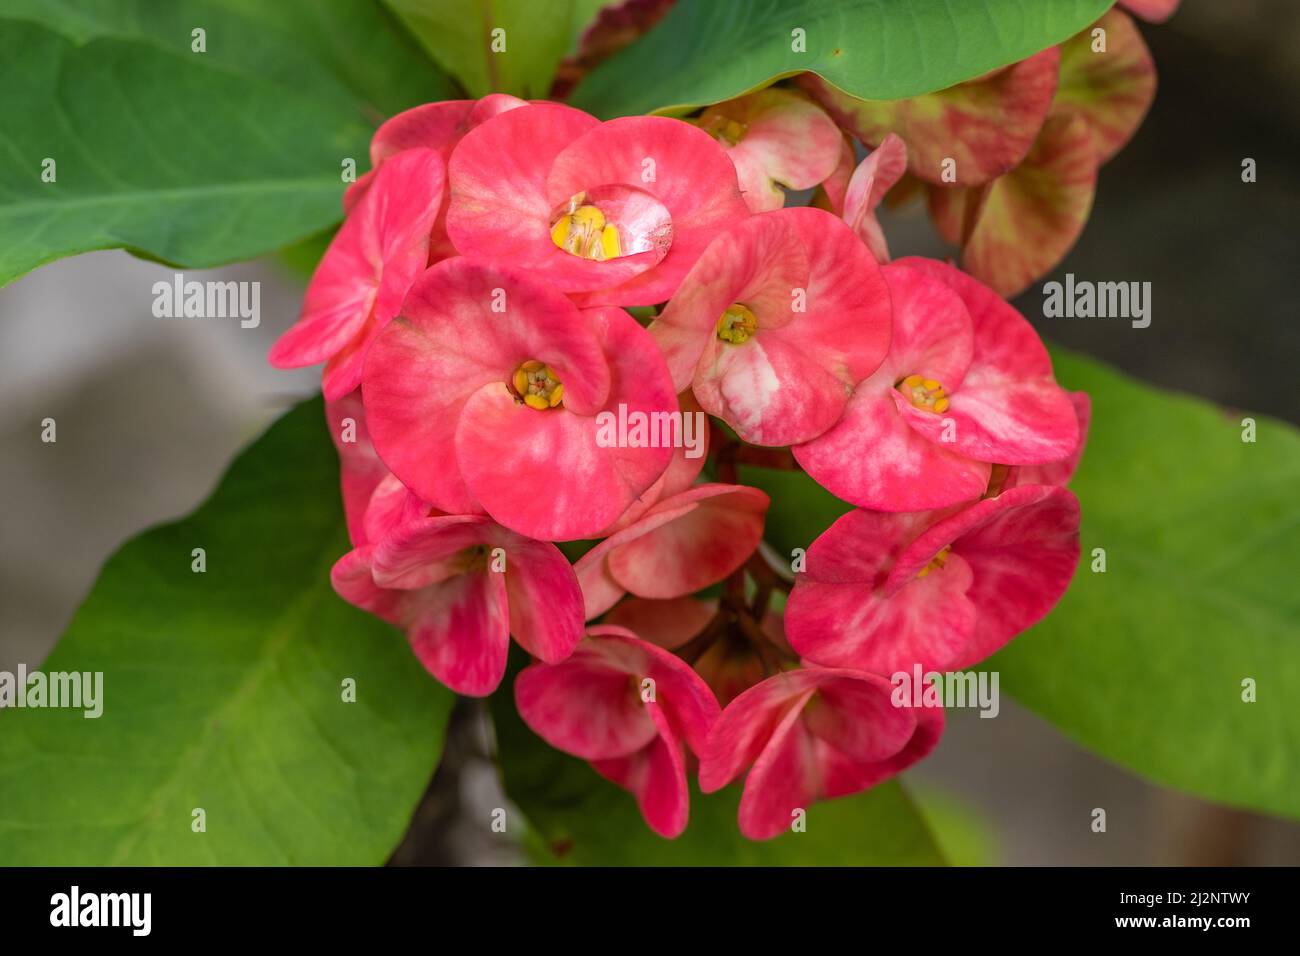 Blooming red Euphorbia Milii or Crown of Thorns. Bali, Indonesia. Stock Photo